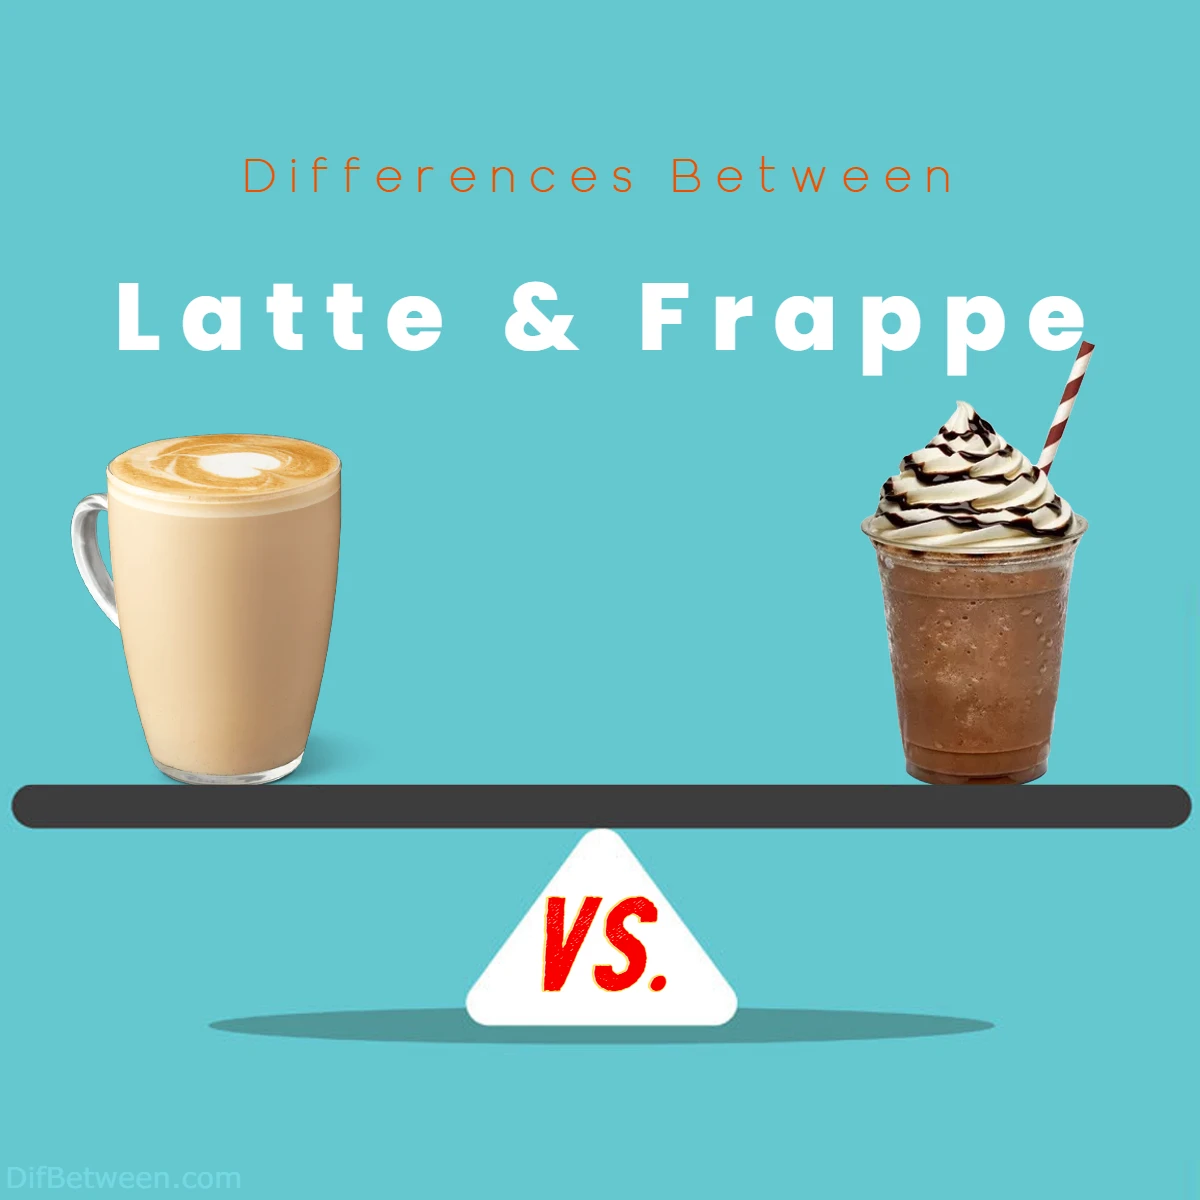 Differences Between Frappe and Latte